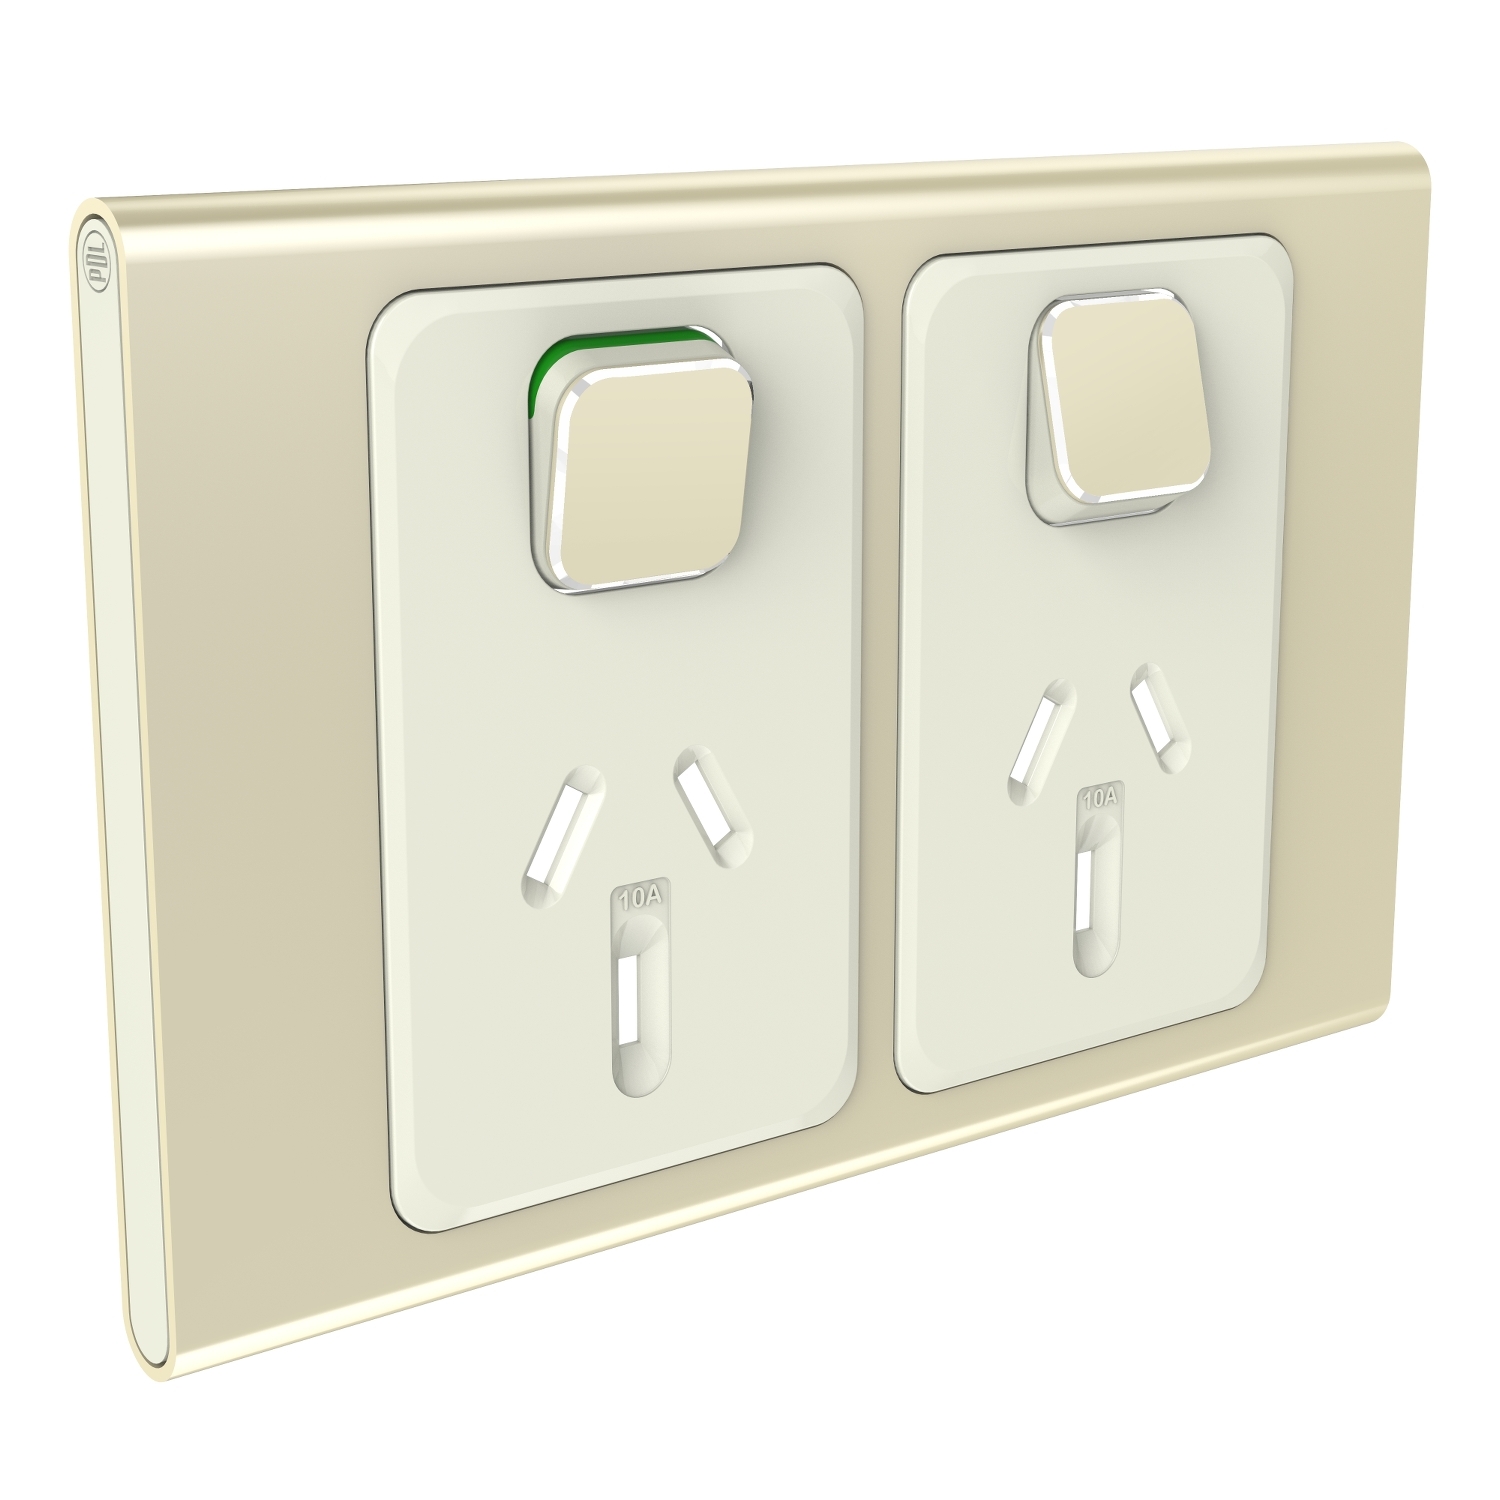 PDLS395C-CE - PDL Iconic Styl, cover frame, 2 switches & 2 sockets, horizontal - Crowne